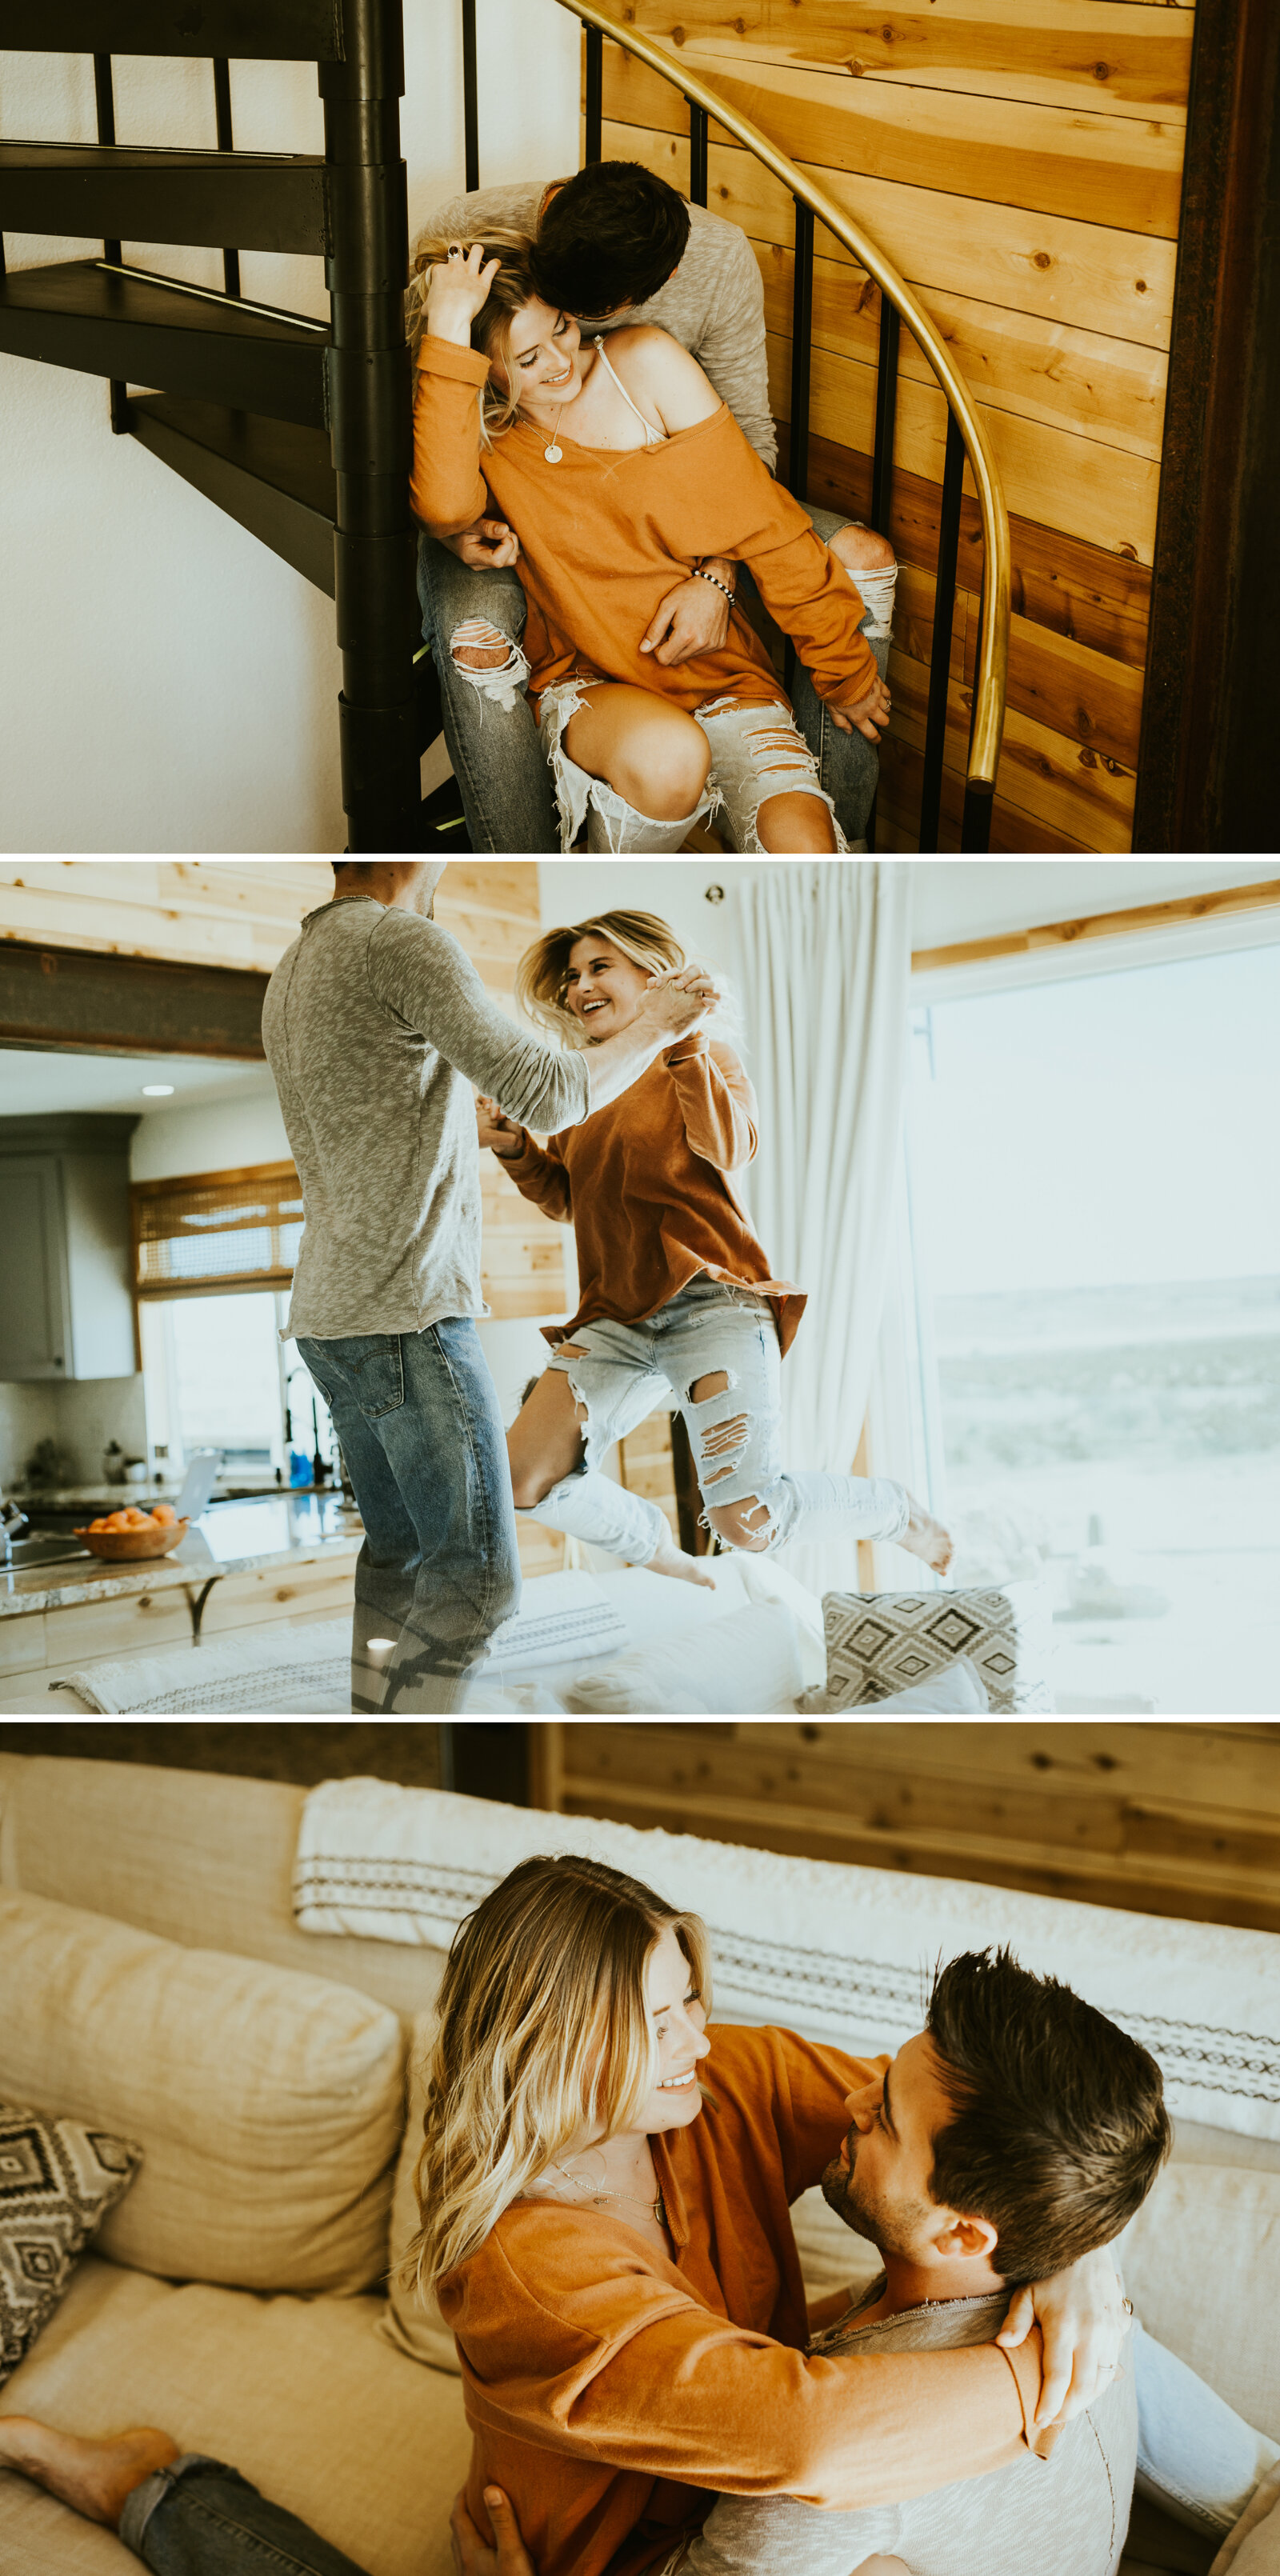 joshua tree national park twentynine palms california in home boudoir couple photos in home engagement photo outfit inspo couples posing idea-1.jpg